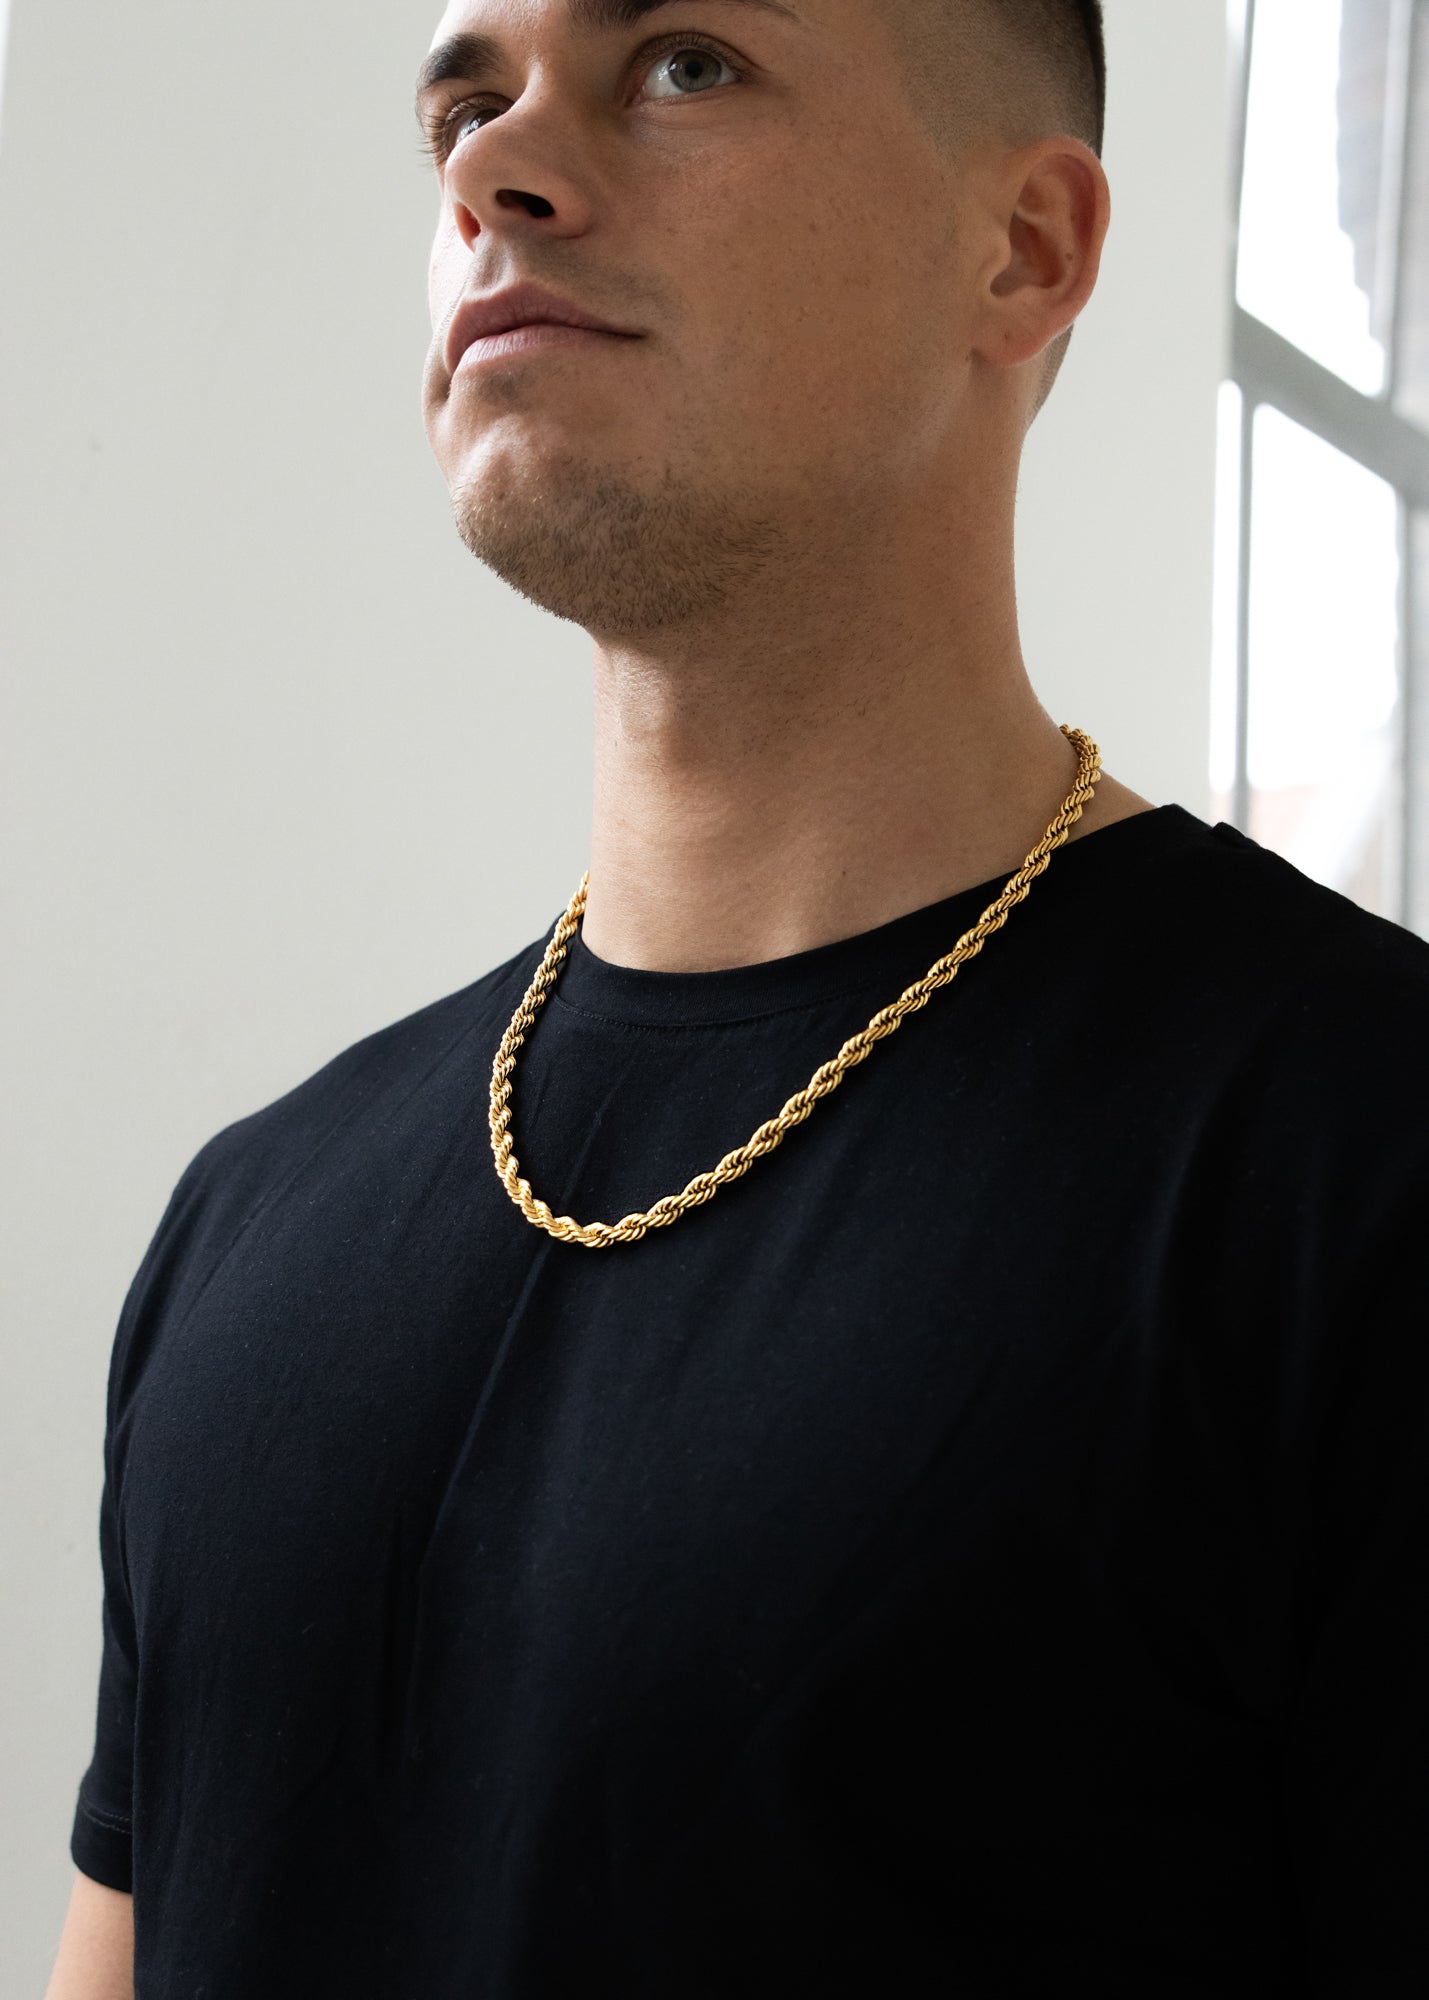 ROPE CHAIN. - (Gold) 6MM